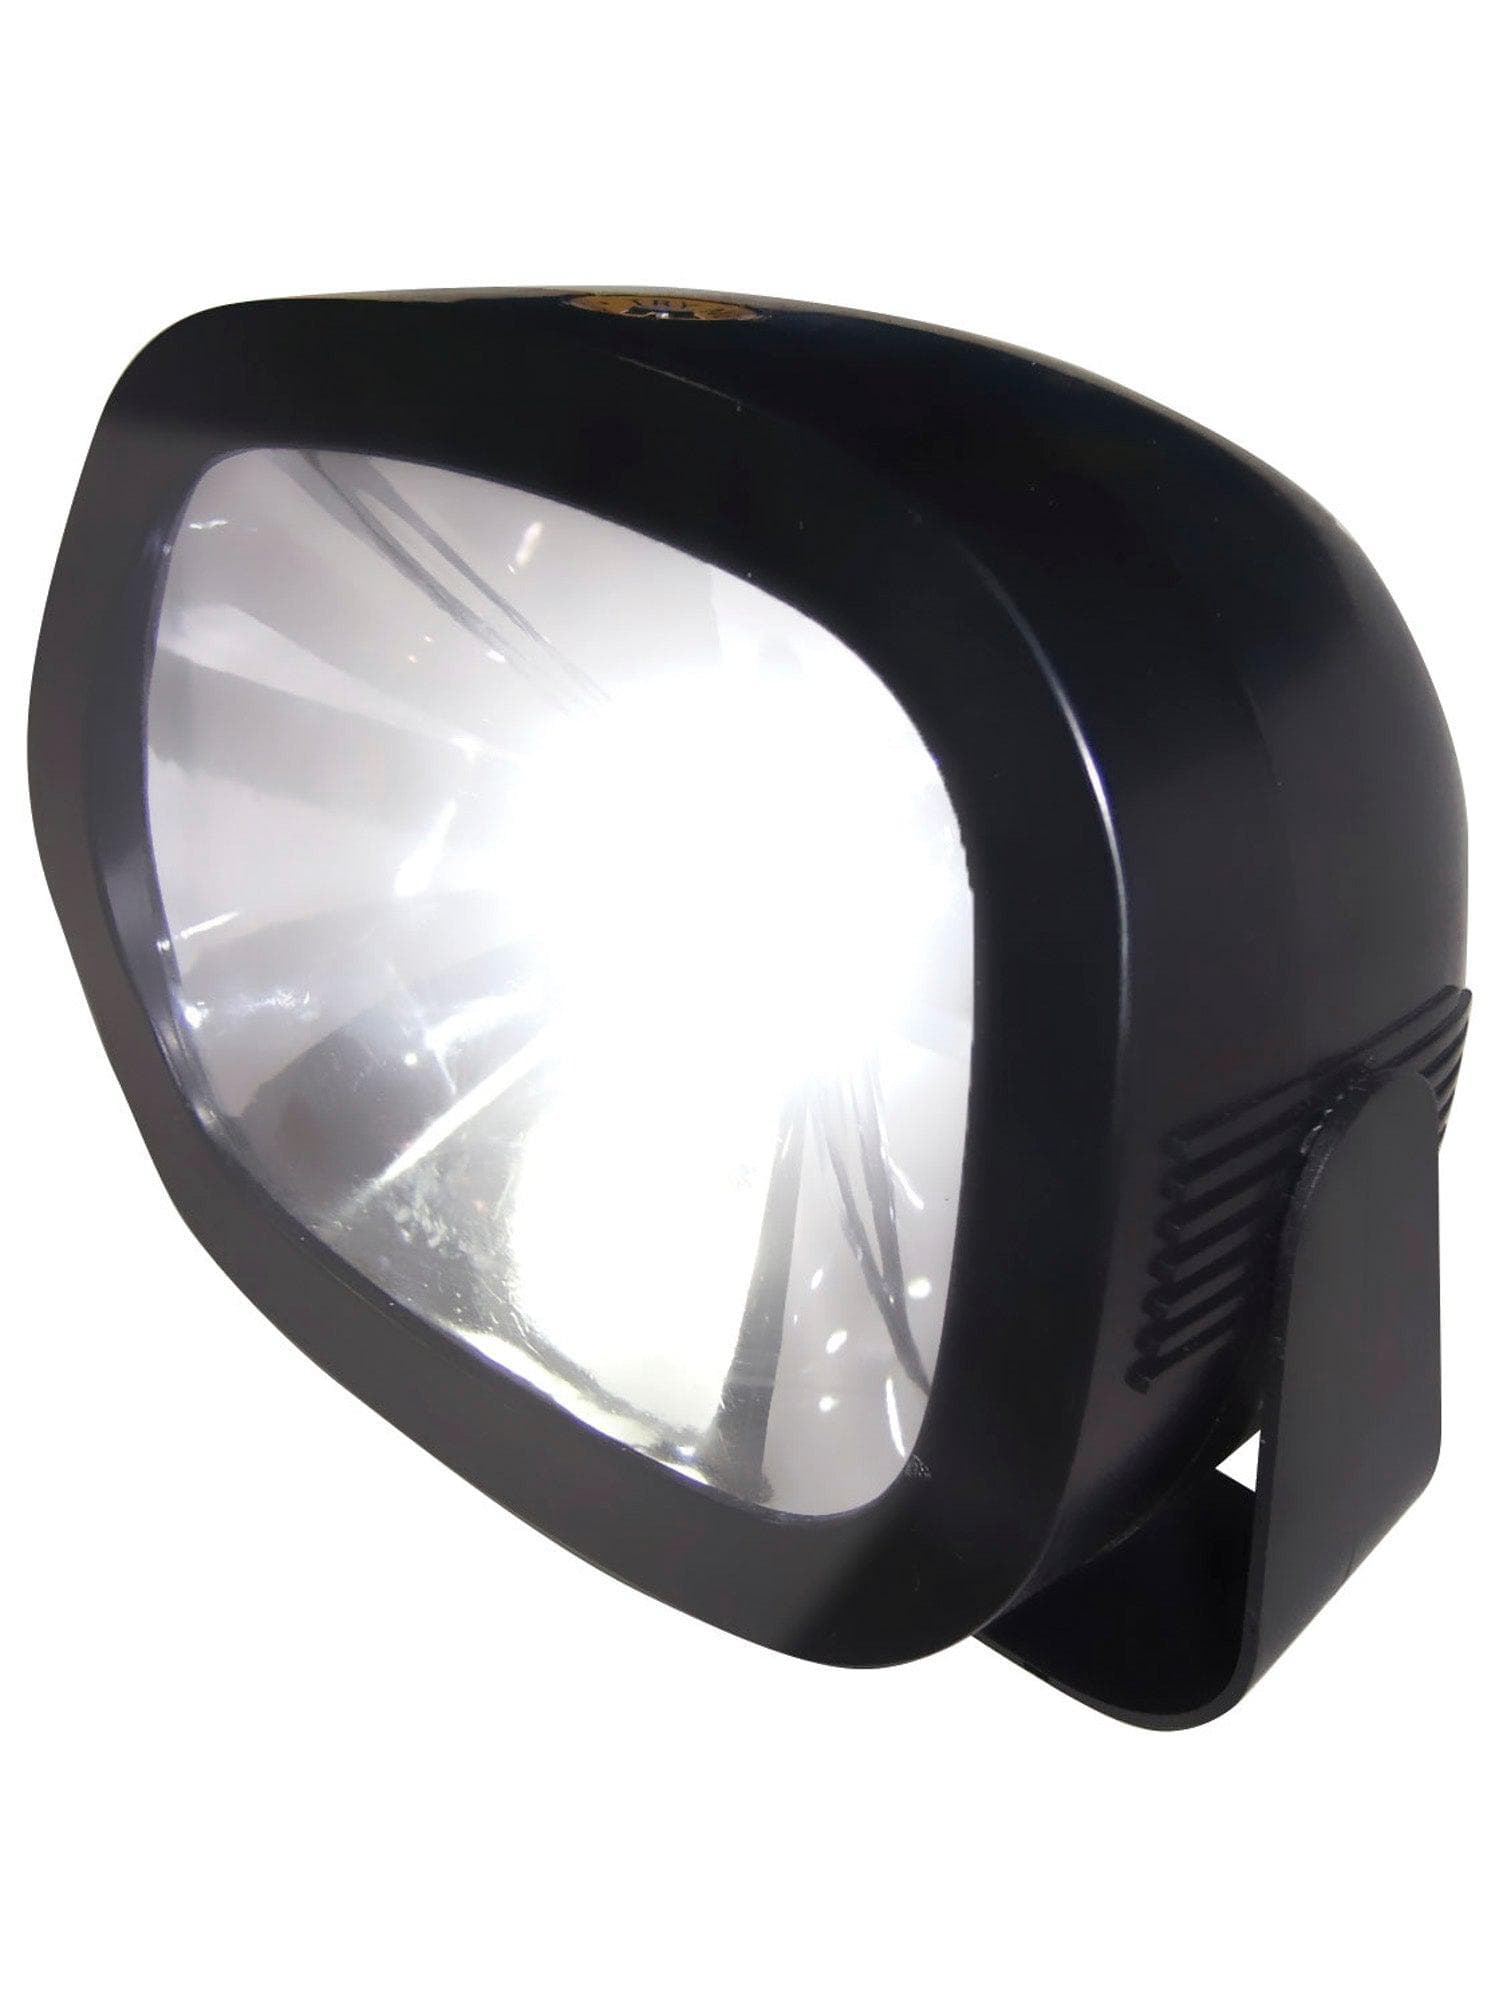 Battery Operated Strobe Light - costumes.com